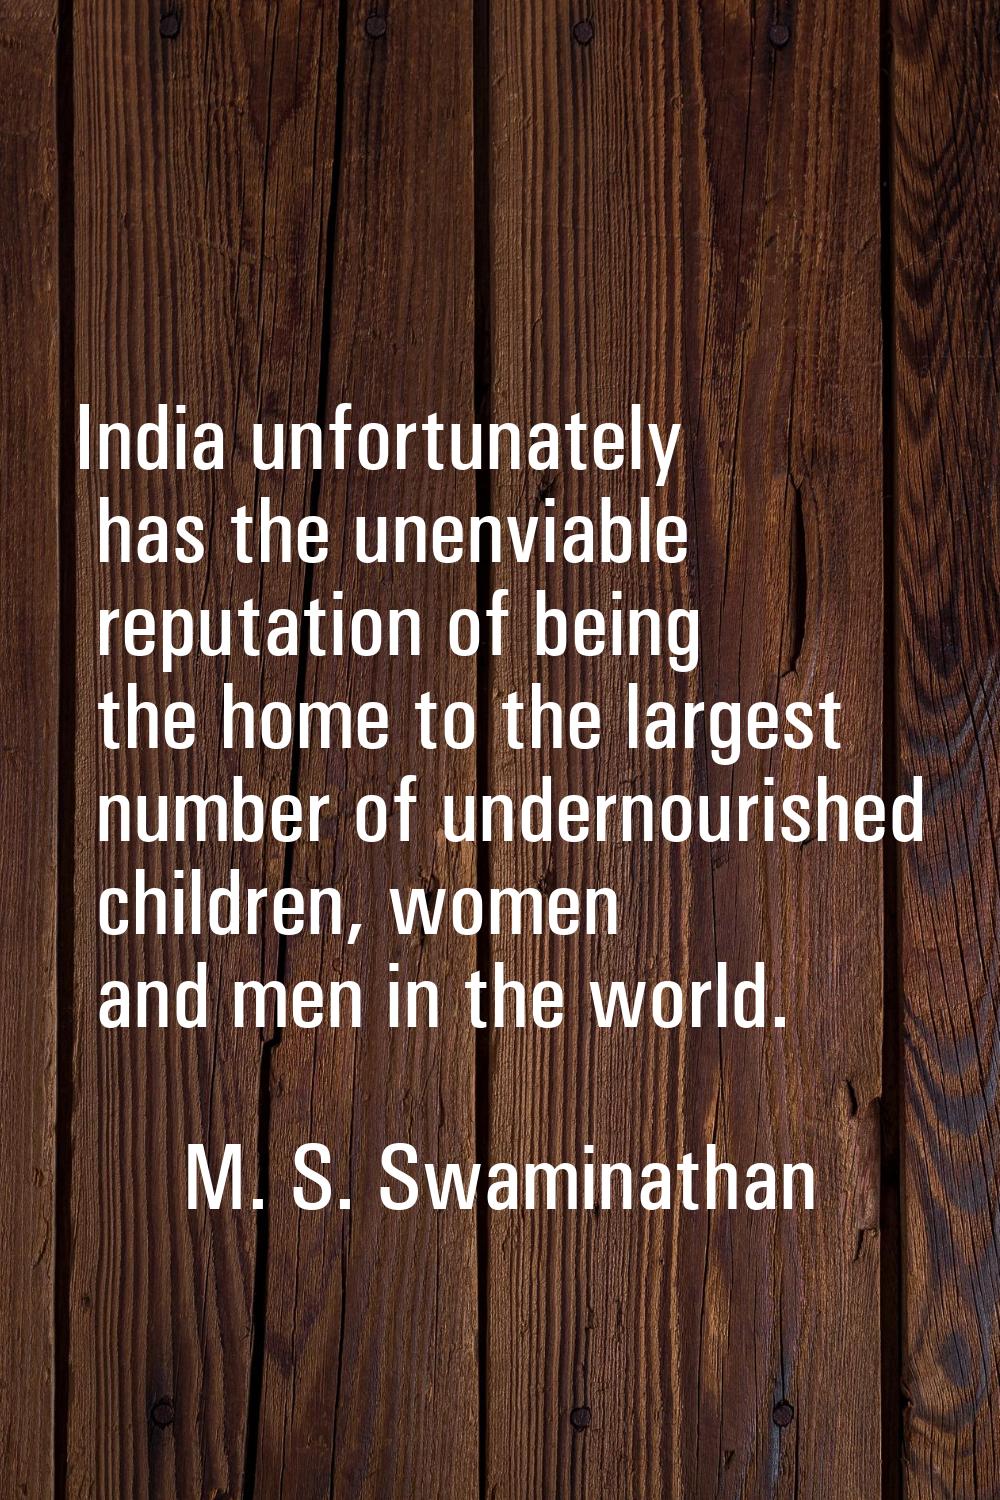 India unfortunately has the unenviable reputation of being the home to the largest number of undern